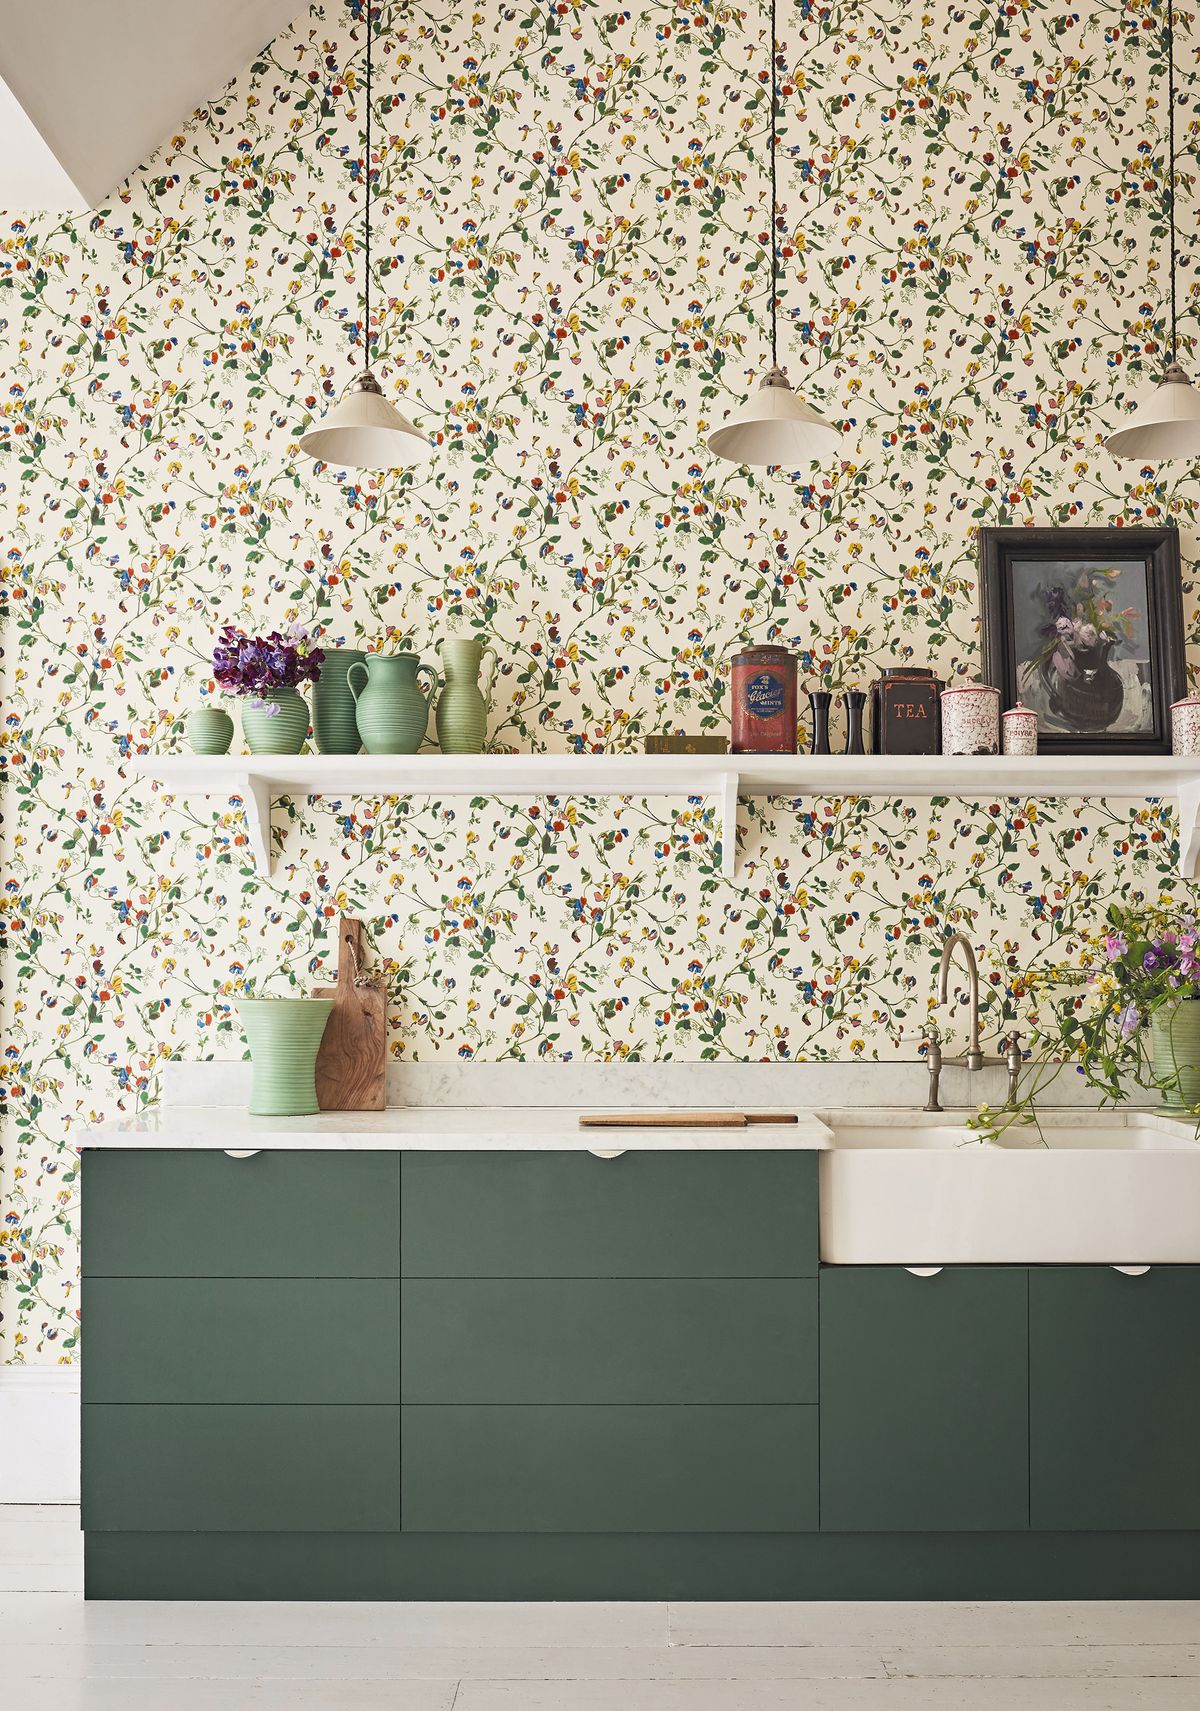 Kitchen wallpaper ideas: 16 beautiful designs to update your space ...